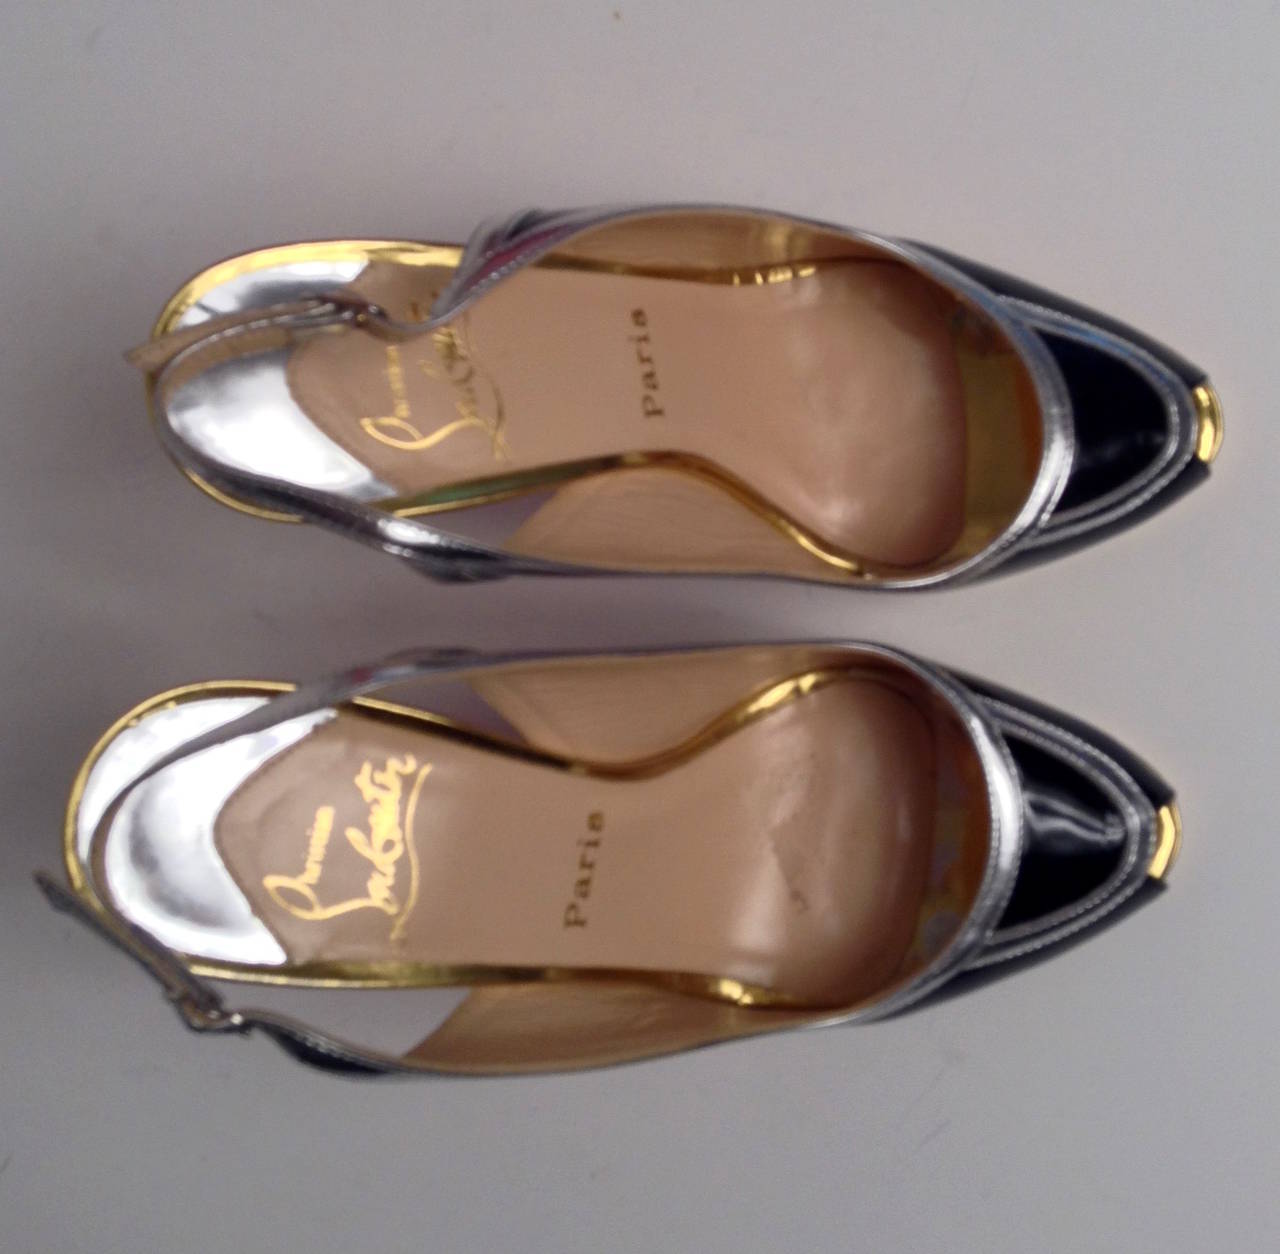 Black patent leather Christian Louboutin slingback peep-toe pumps with metallic silver-tone trim and metallic gold-tone covered platform and heel.

Includes dust bag.

Fits like an 8

In very good condition, minor wear on gold platform and